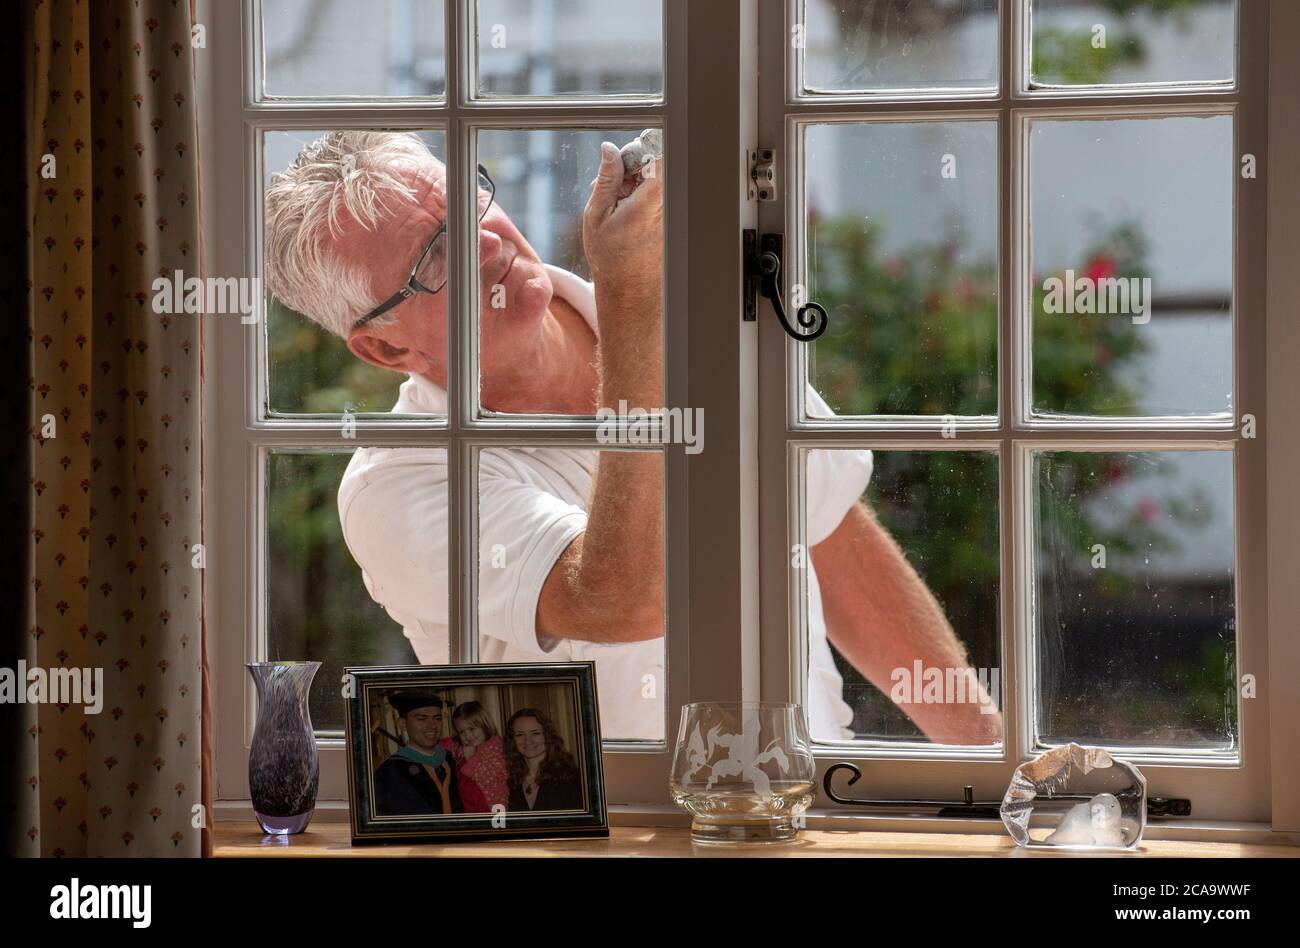 Hampshire, England, UK. 2020. Painter decorator painting small windows on a rural house viewed from inside the home. Stock Photo